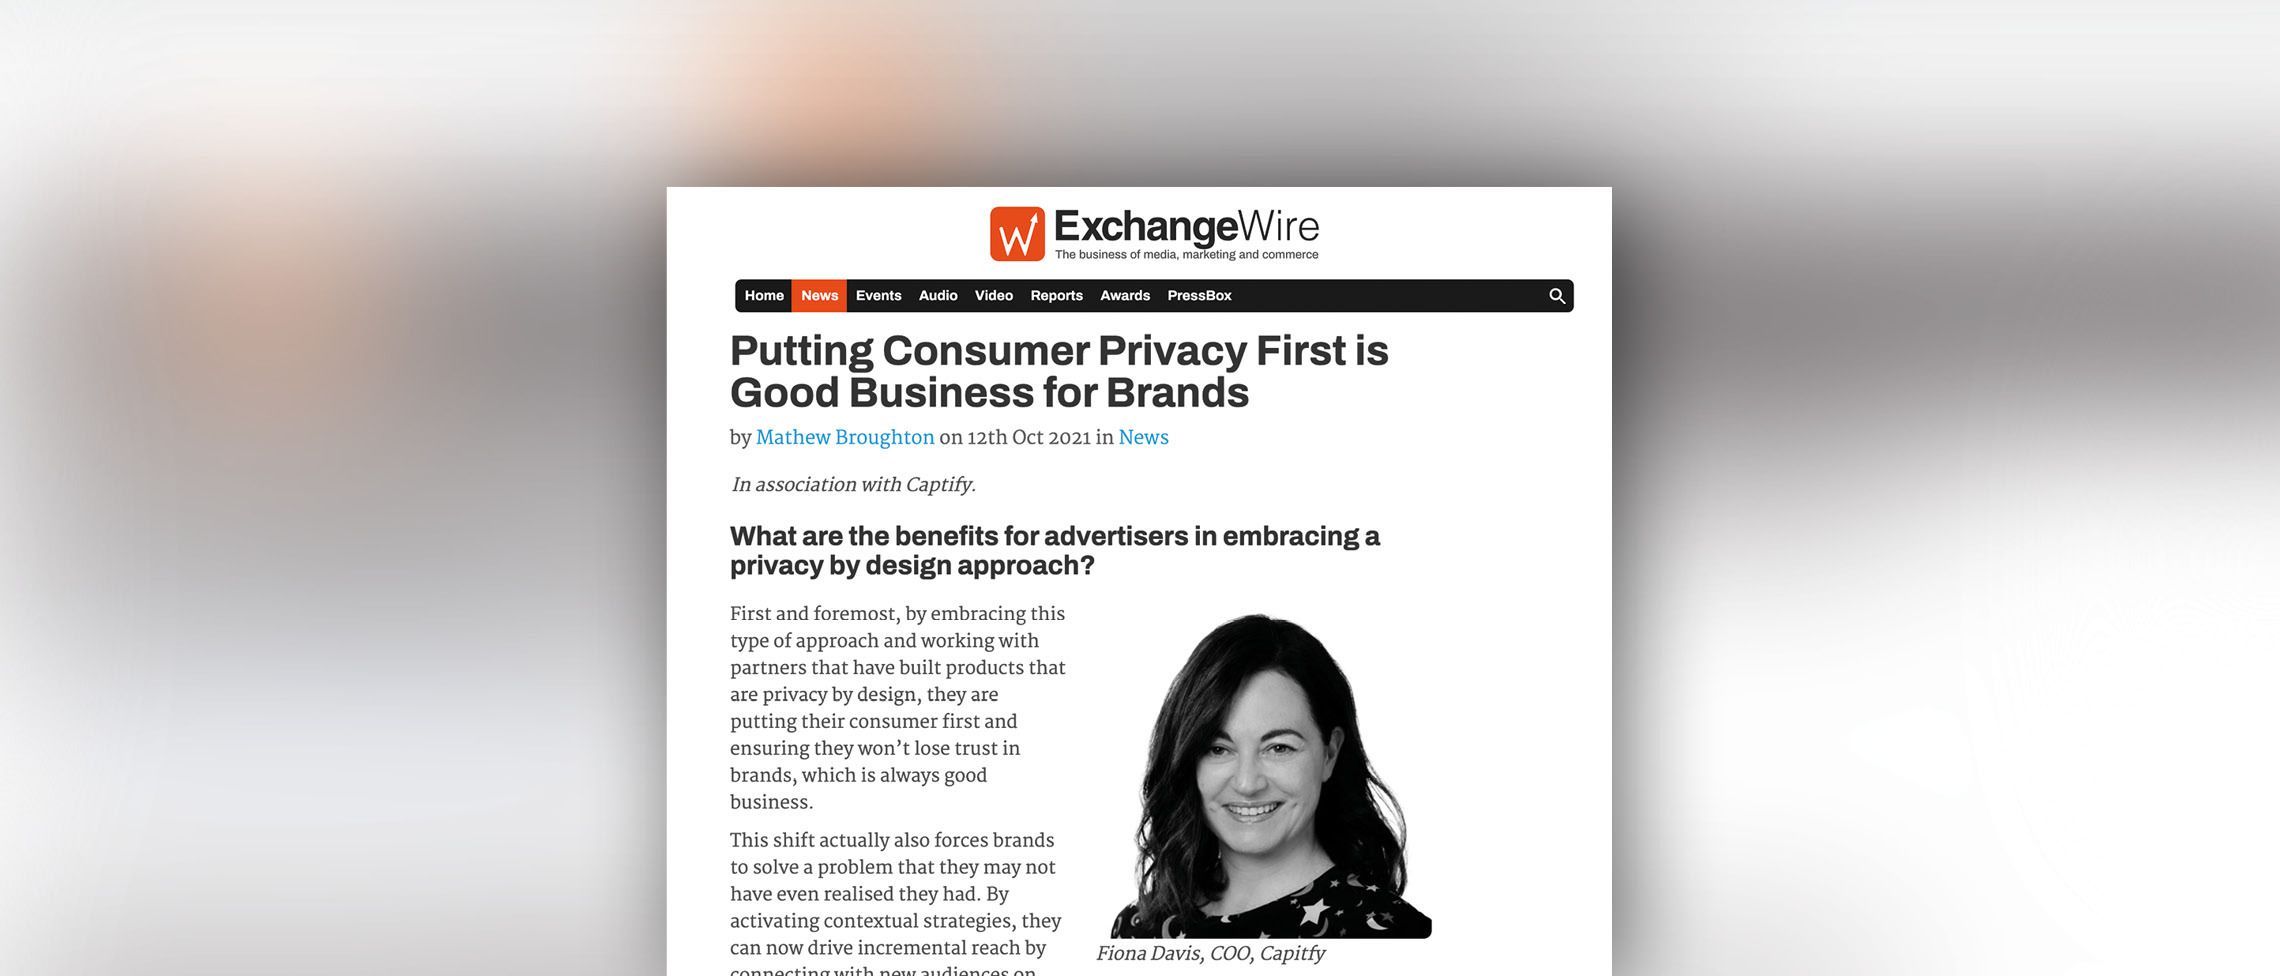 ExchangeWire: Captify’s COO, Fiona Davis—Putting Consumer Privacy First is Good Business for Brands